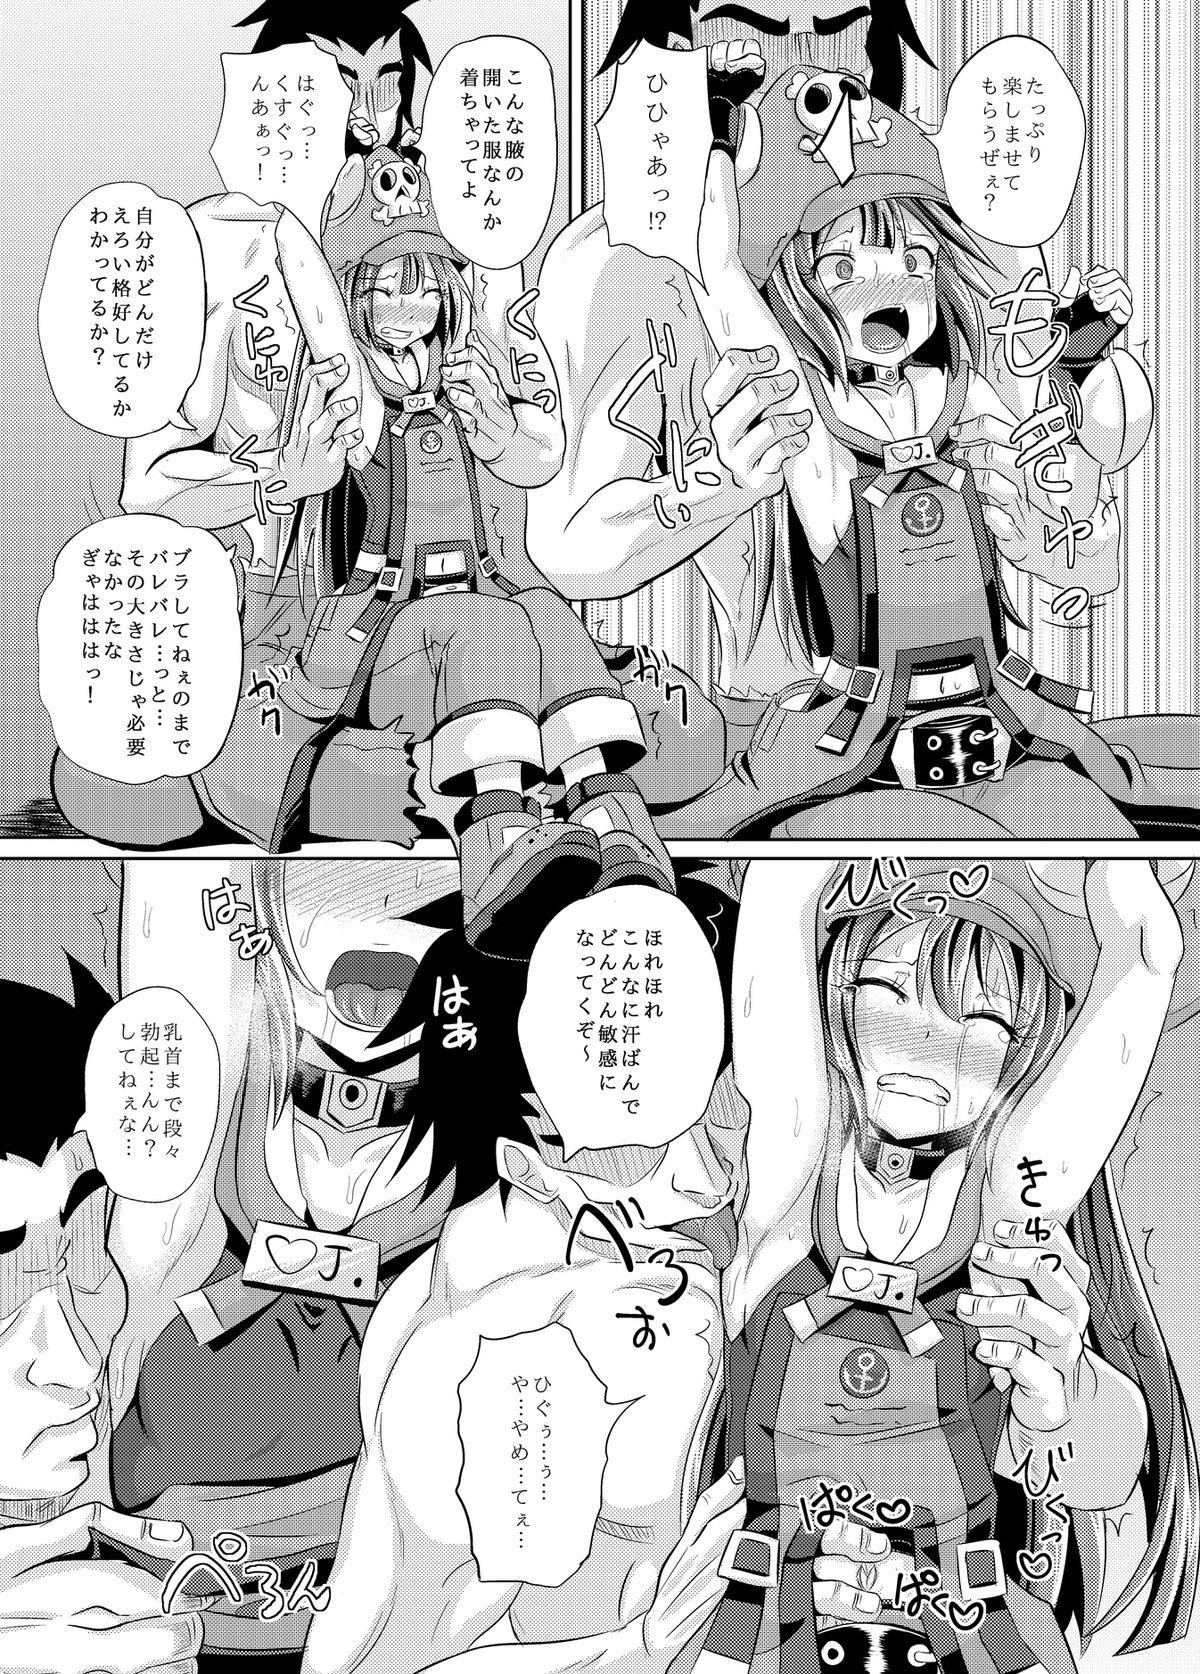 Gayfuck May-chan Battle Arena - Guilty gear Straight - Page 8